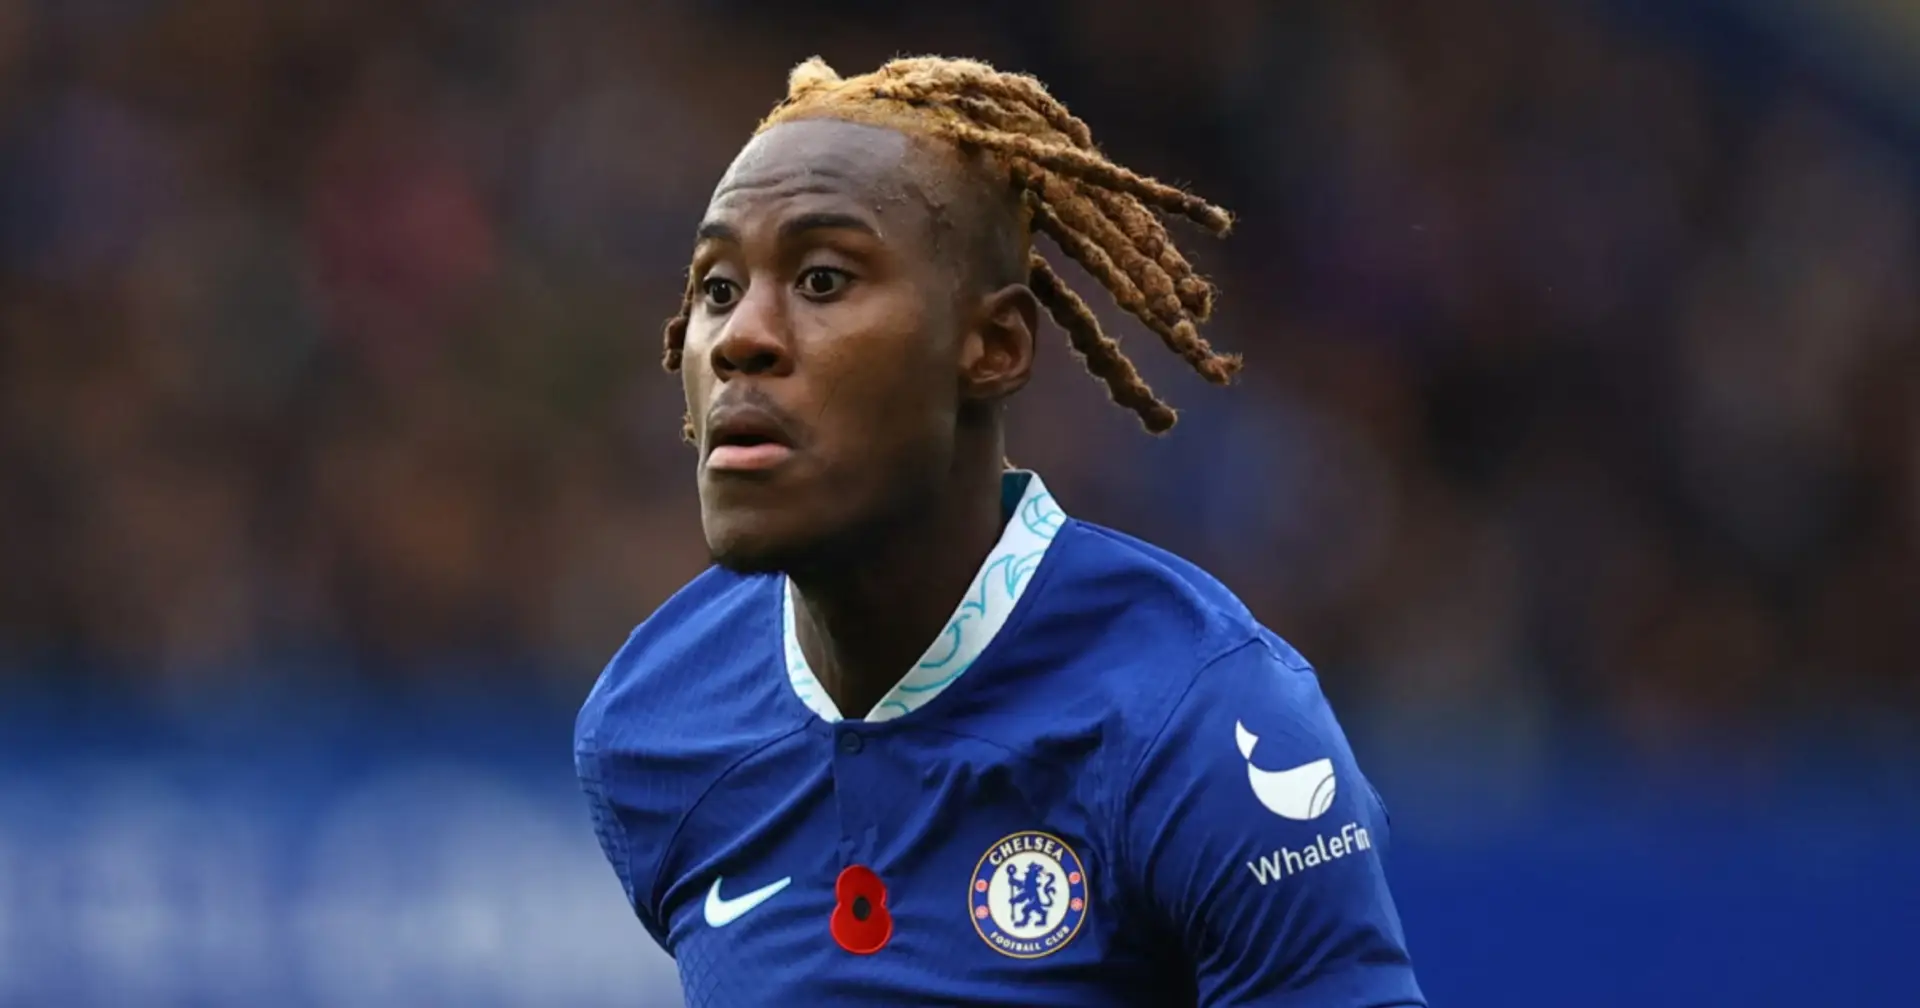 Chalobah out: Chelsea release injury update ahead of Liverpool clash